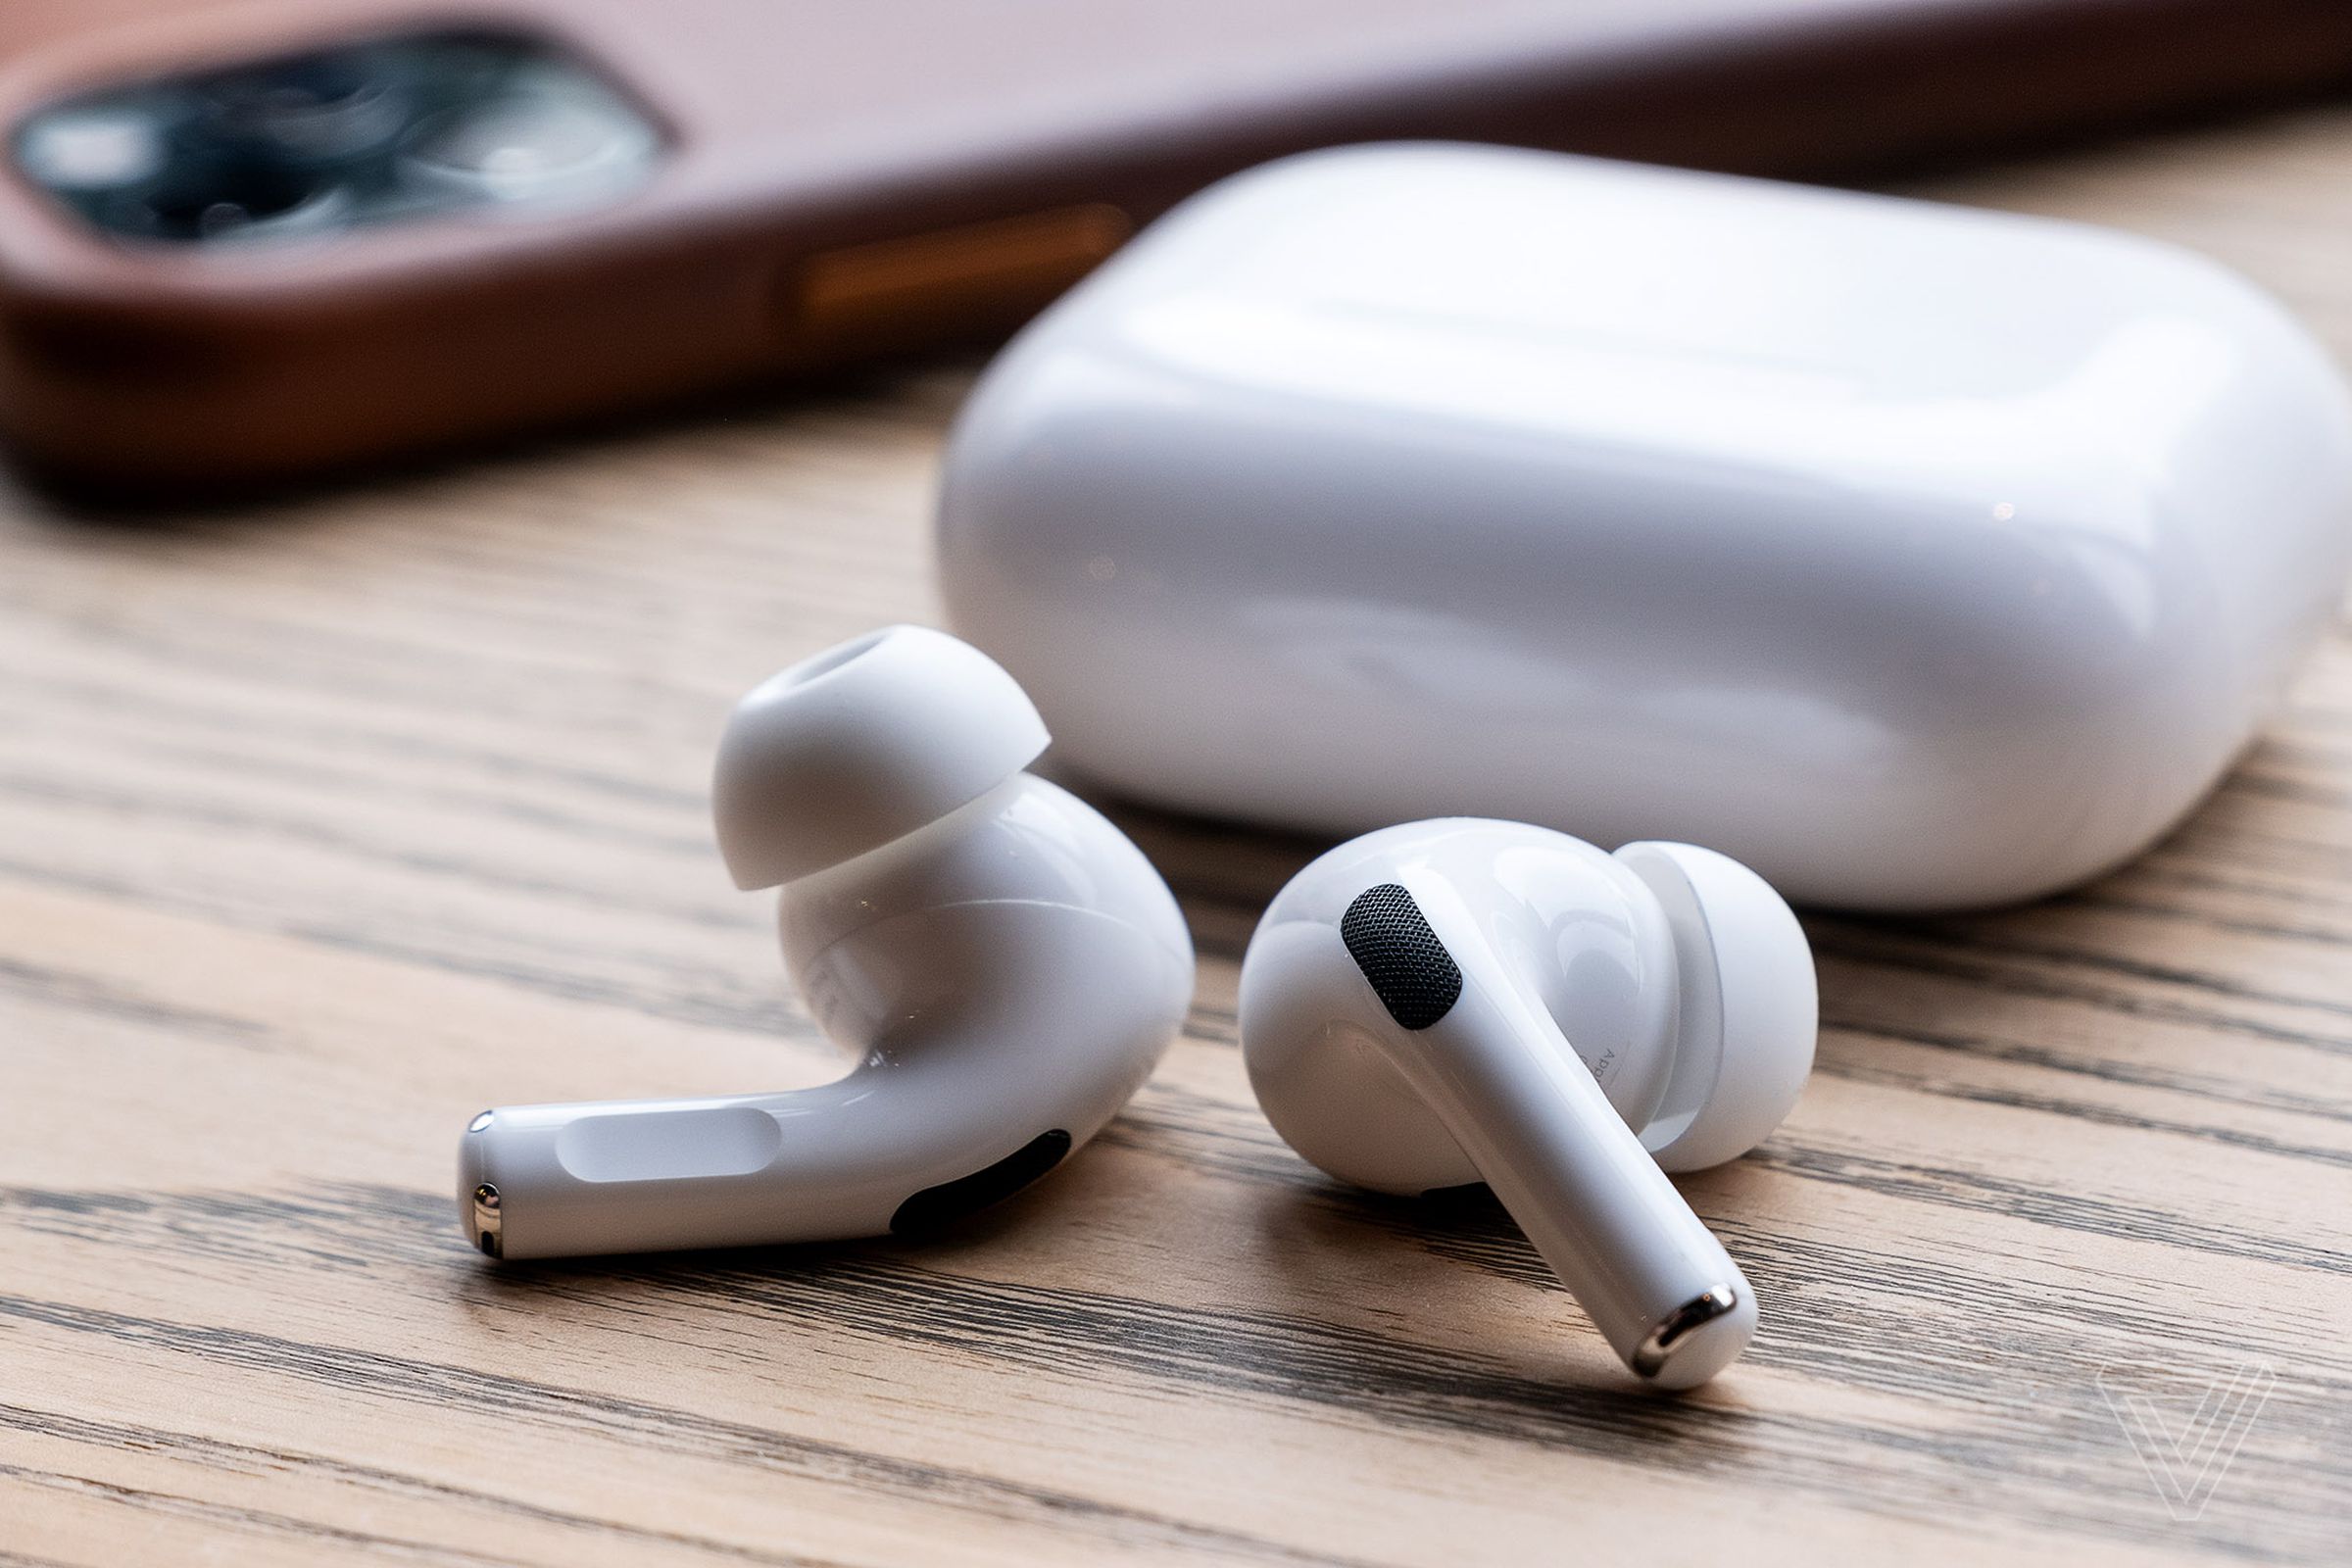 The first-gen AirPods Pro are frequently on sale, sometimes for pretty deep discounts.